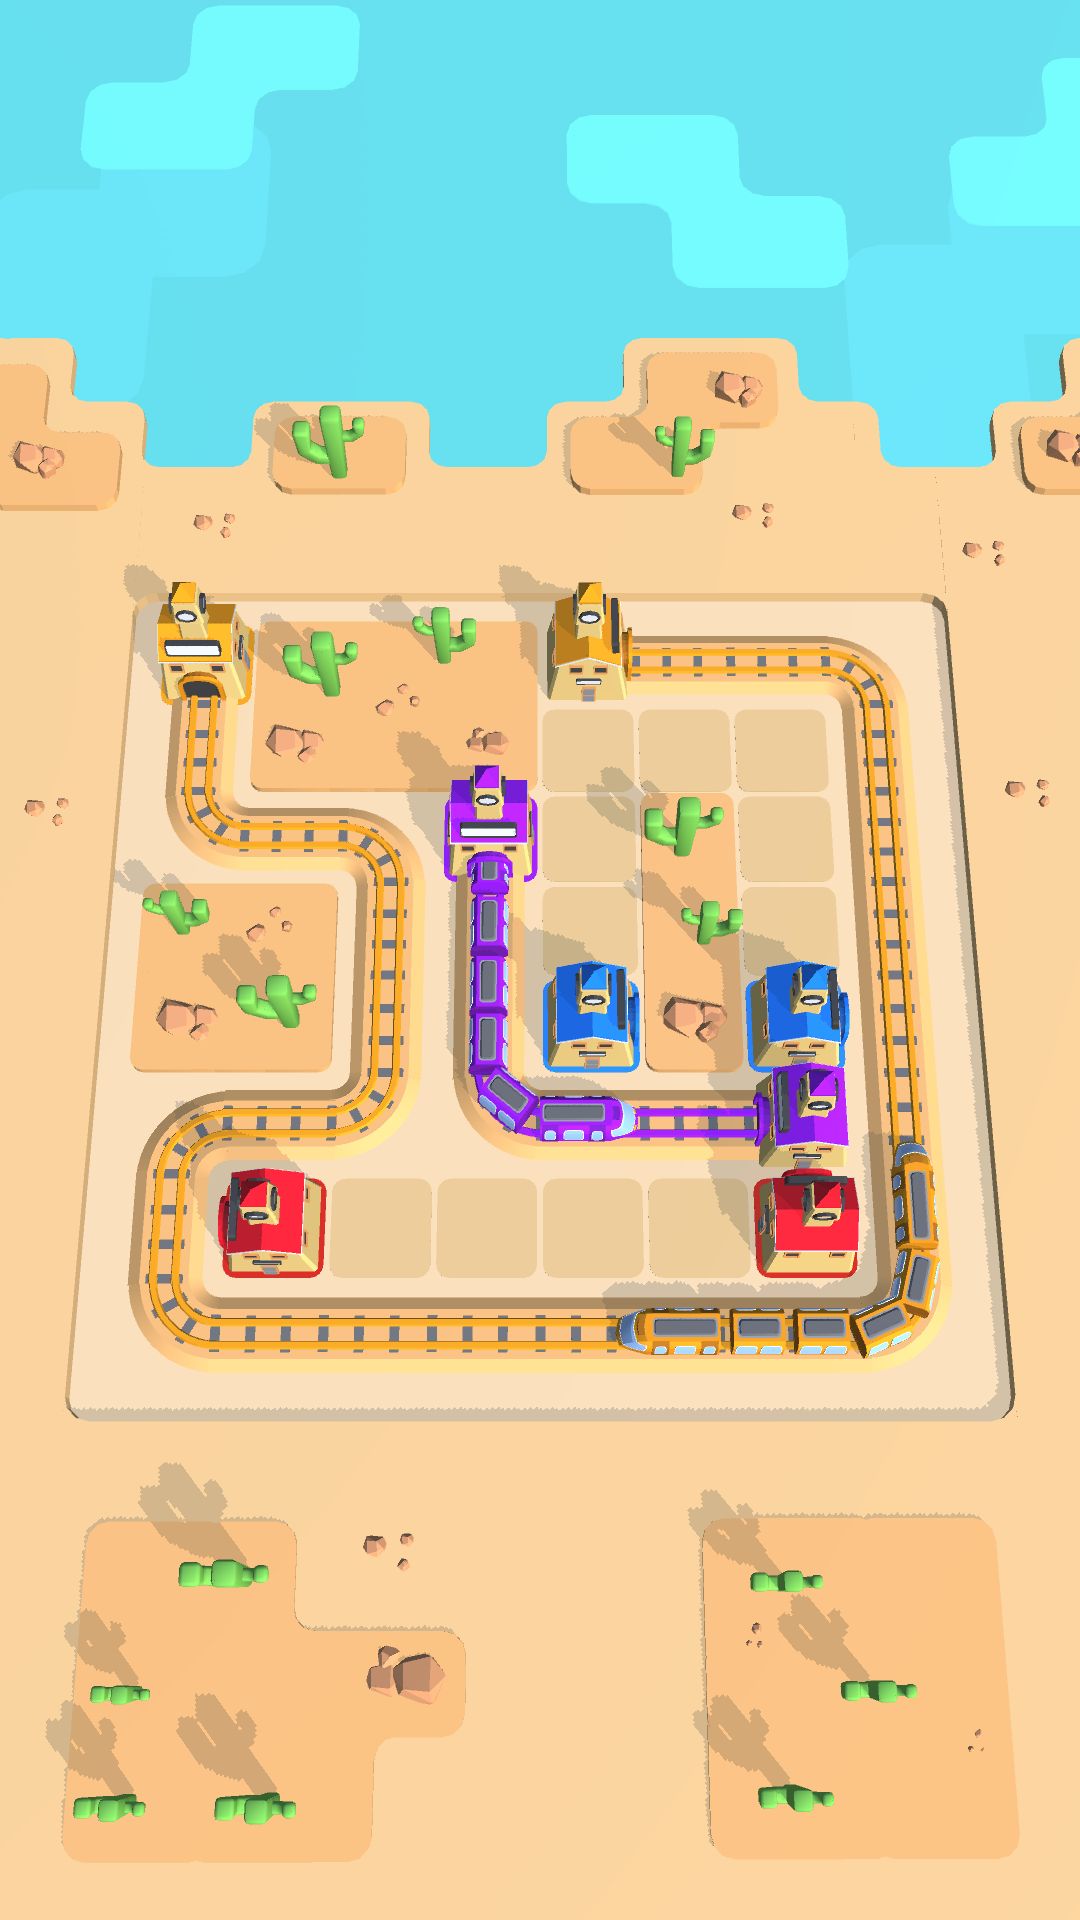 Train Connect - Android game screenshots.